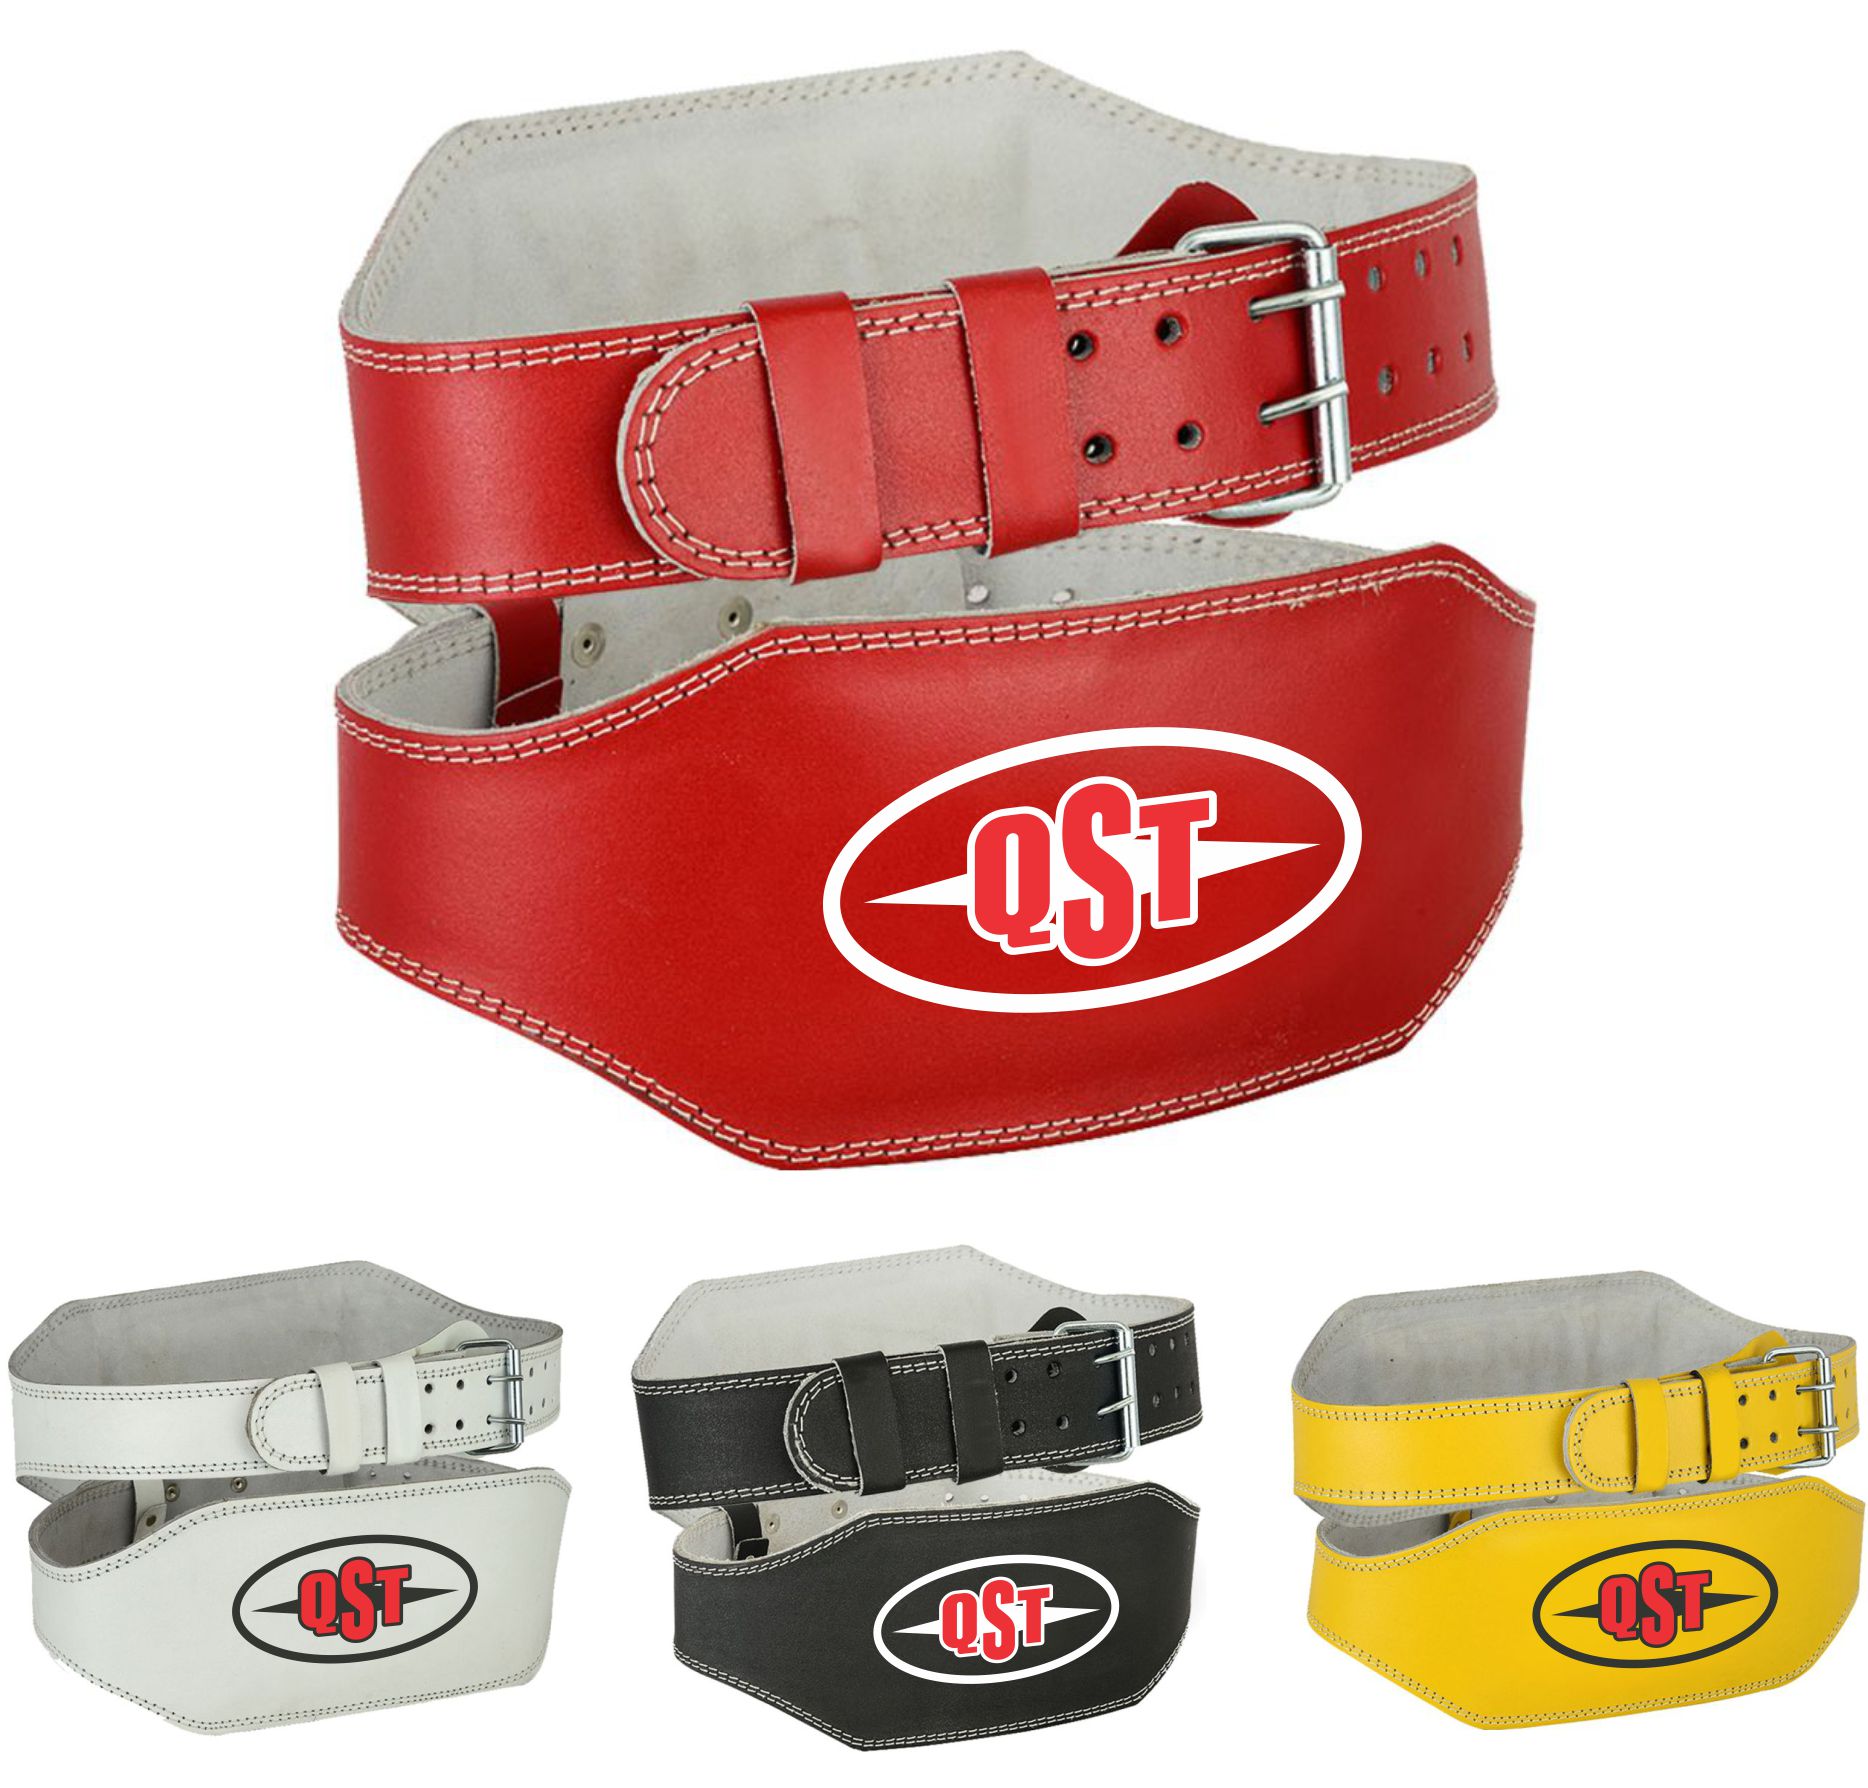 Leather Weightlifting Belt - ACS-1536